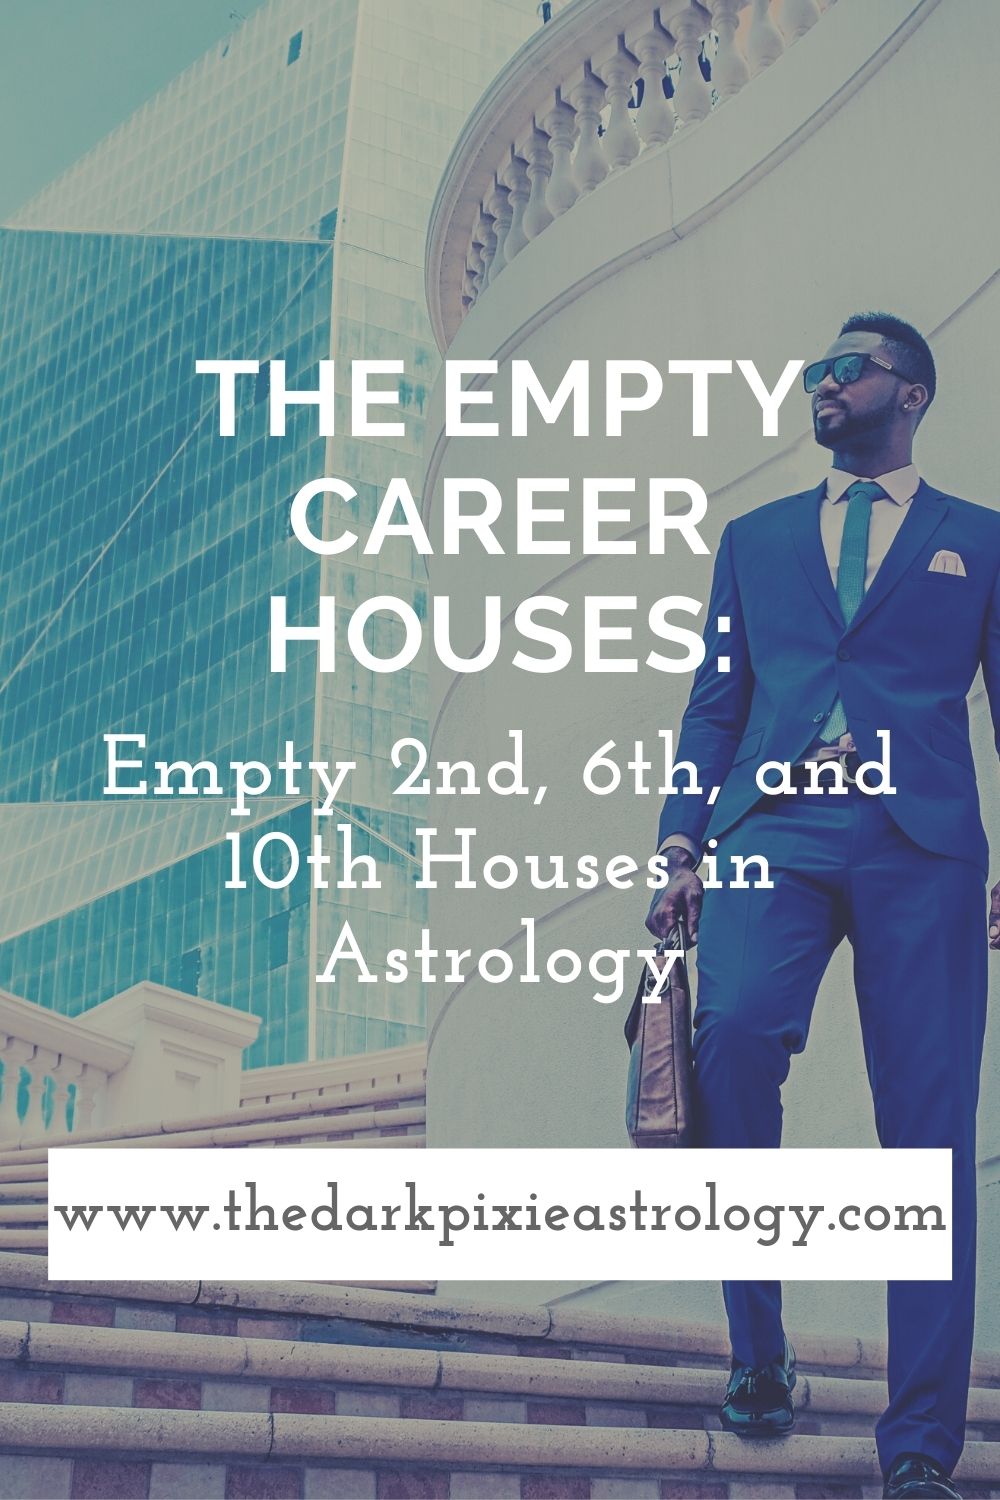 The Empty Career Houses: Empty 2nd, 6th, and 10th Houses in Astrology - The Dark Pixie Astrology